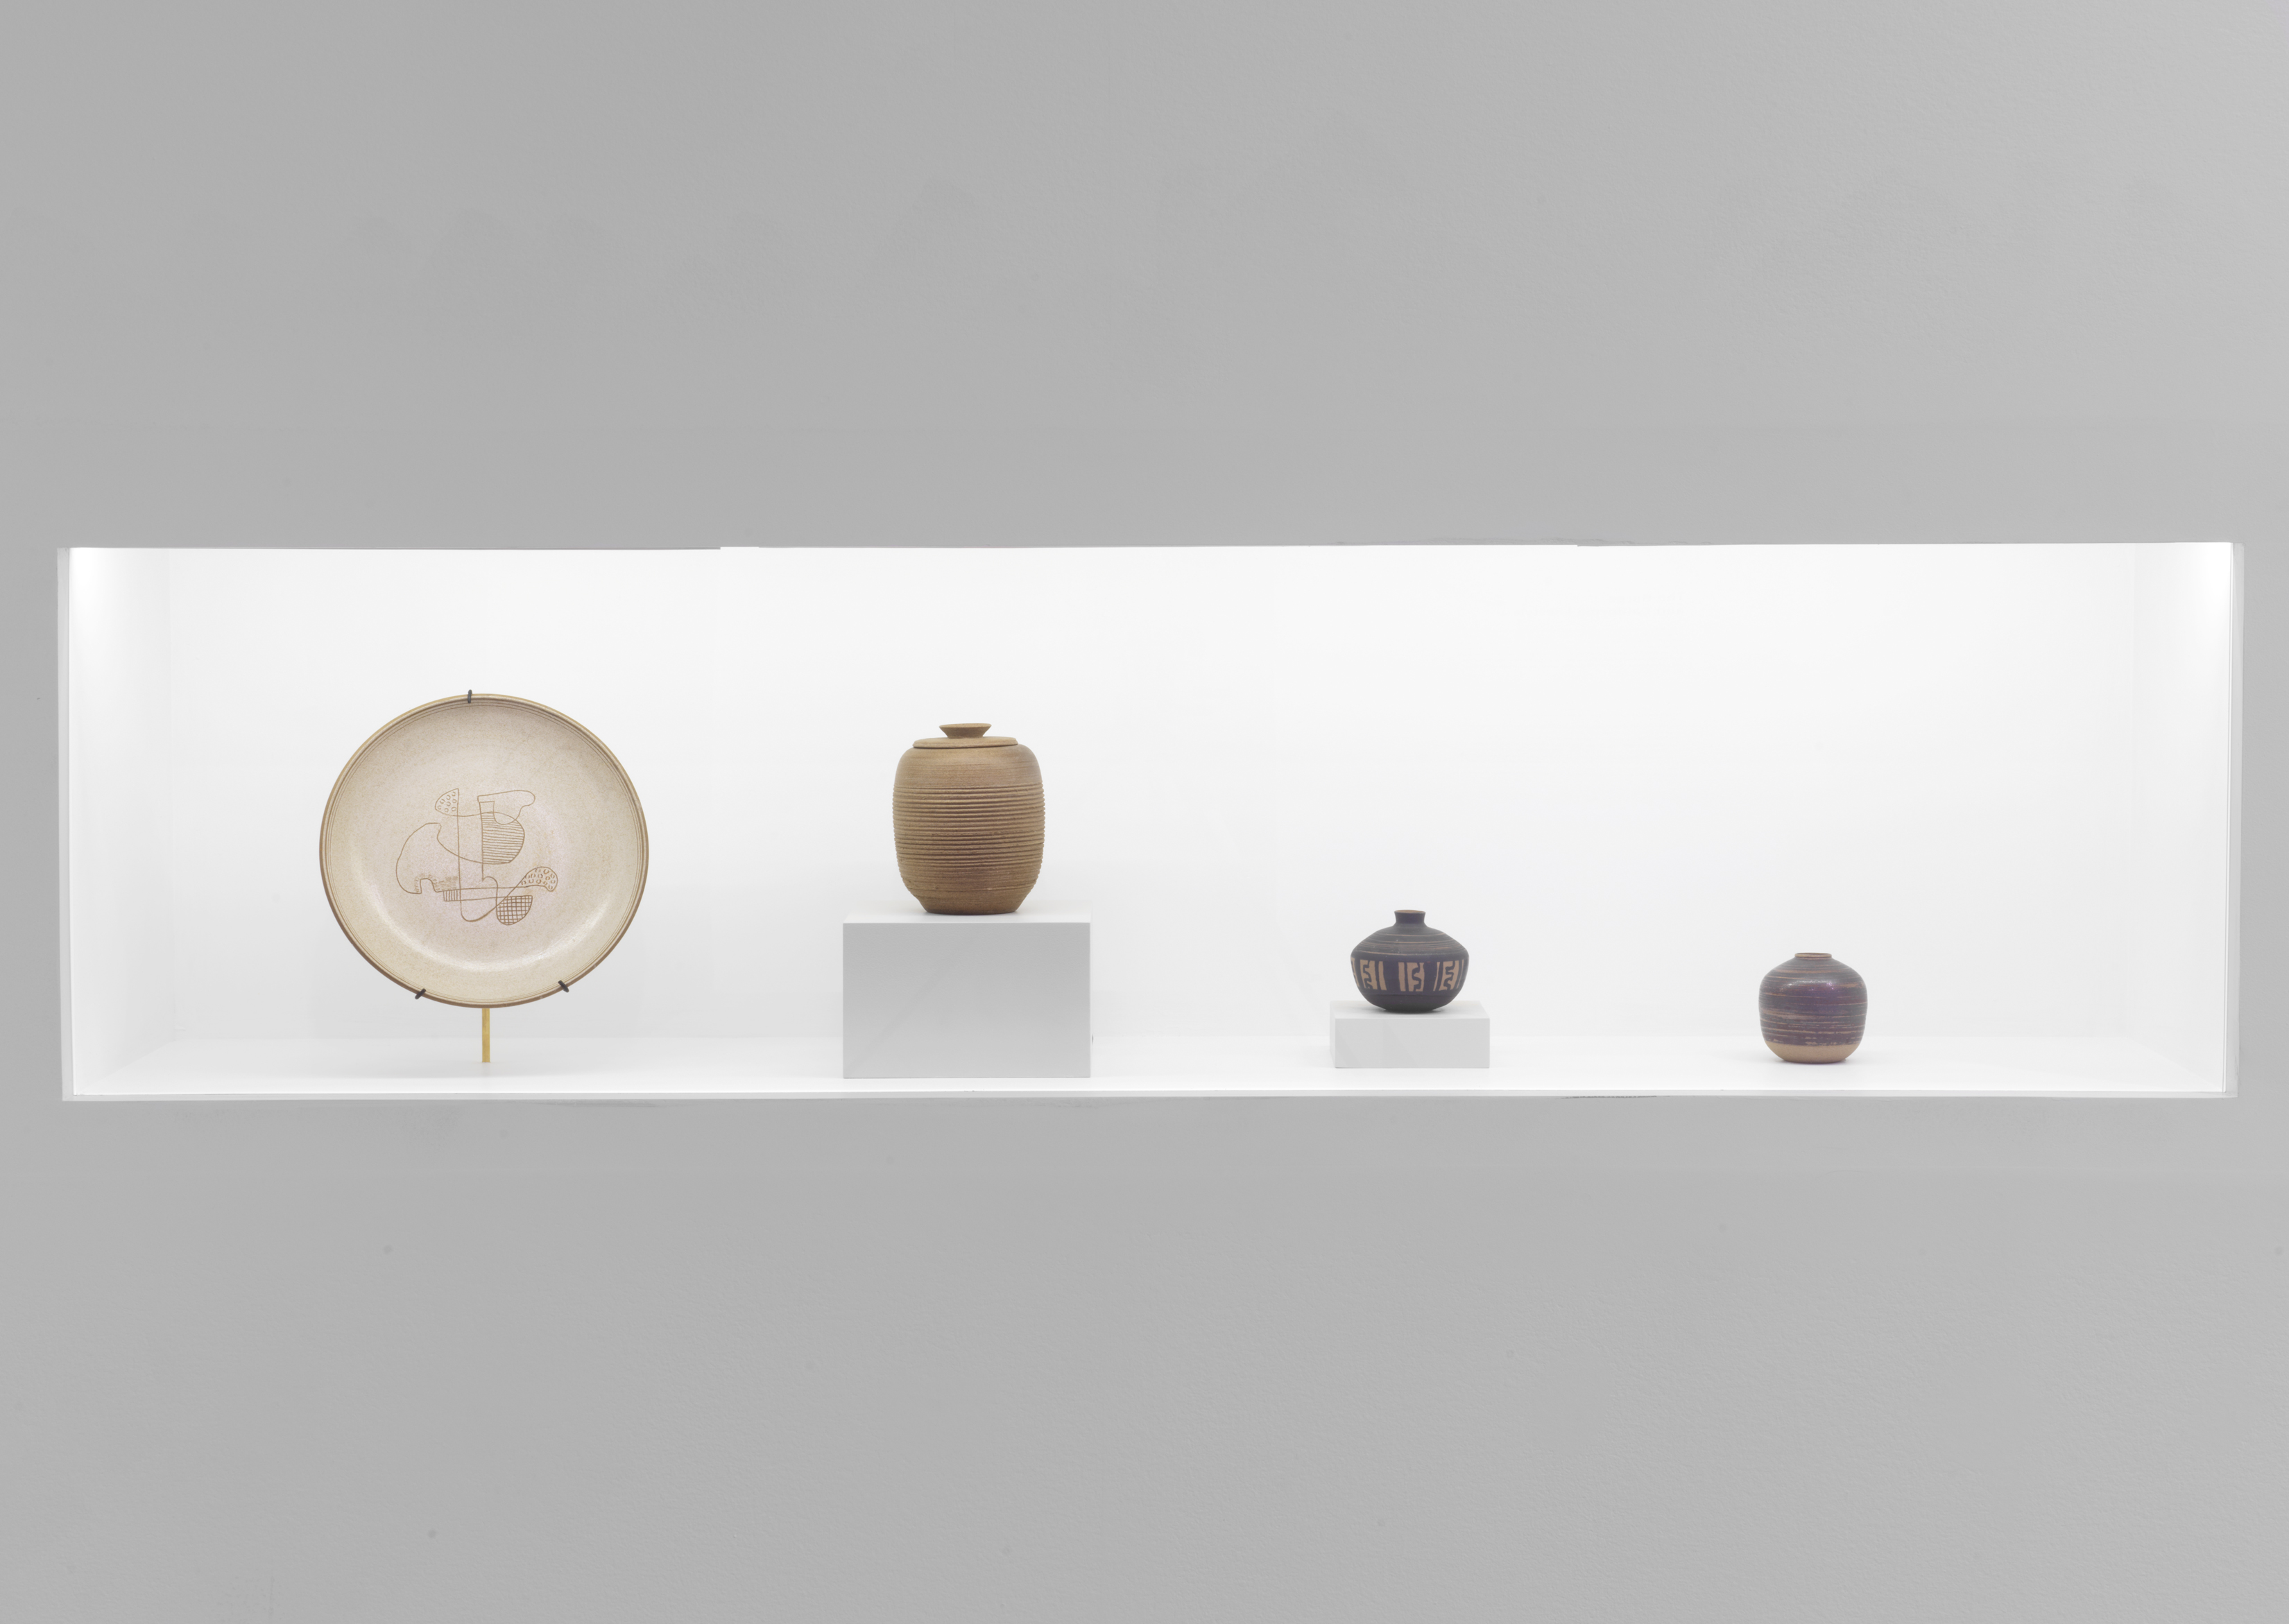 Photograph displaying four ceramic pieces, from left to right: one beige plate a brown vase on top of a white cube, a blue and brown vase and a smaller purple and beige vase, all of different sizes.